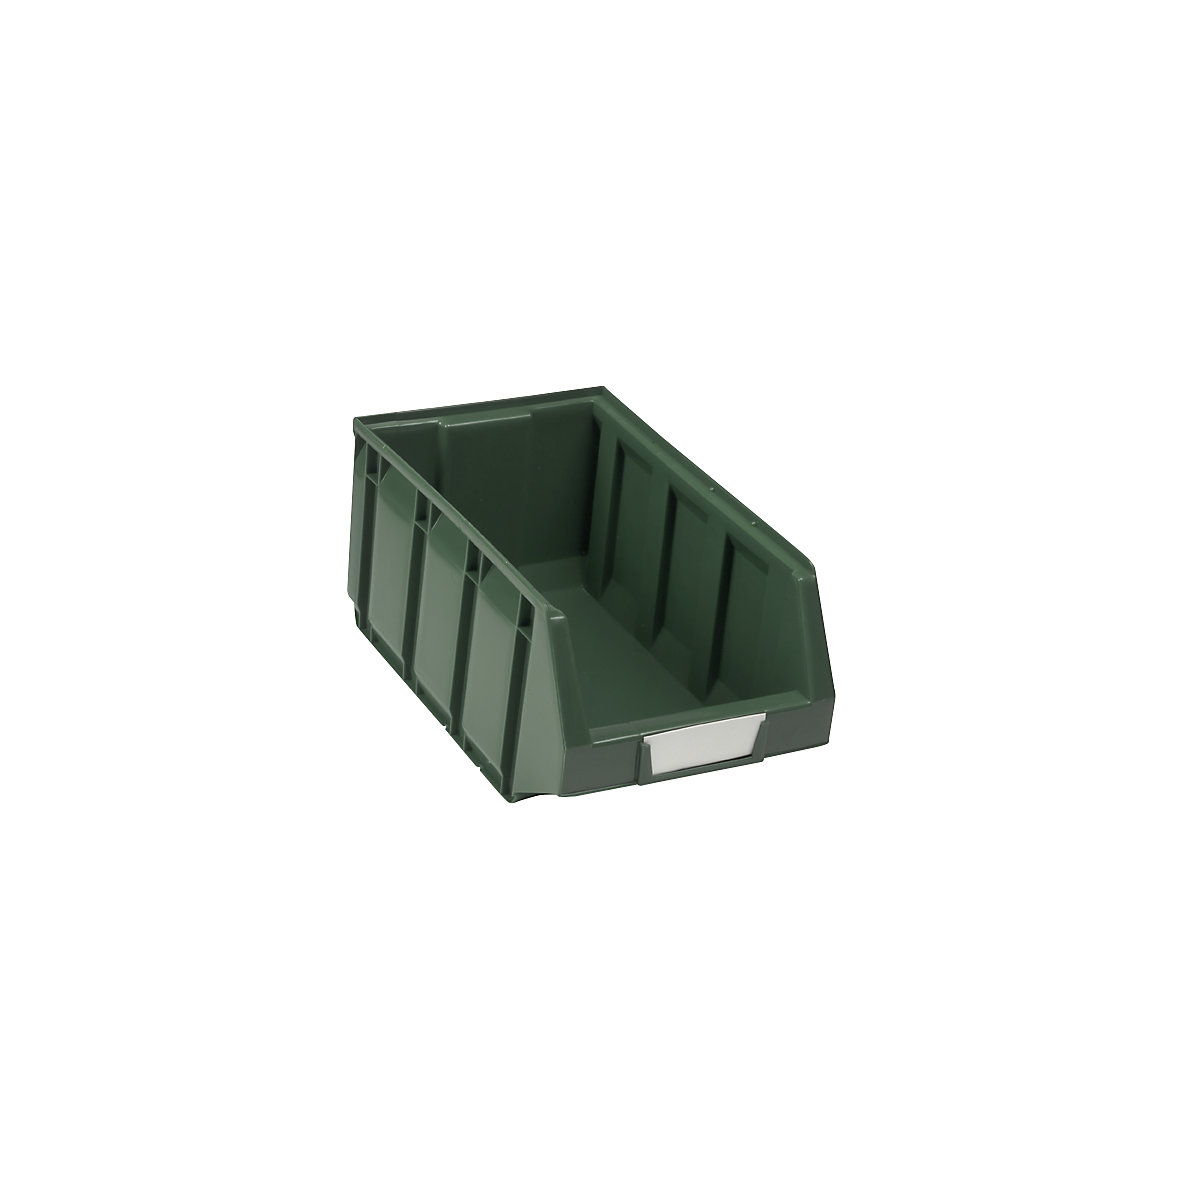 Open fronted storage bin made of polyethylene, LxWxH 345 x 205 x 164 mm, green, pack of 24-9